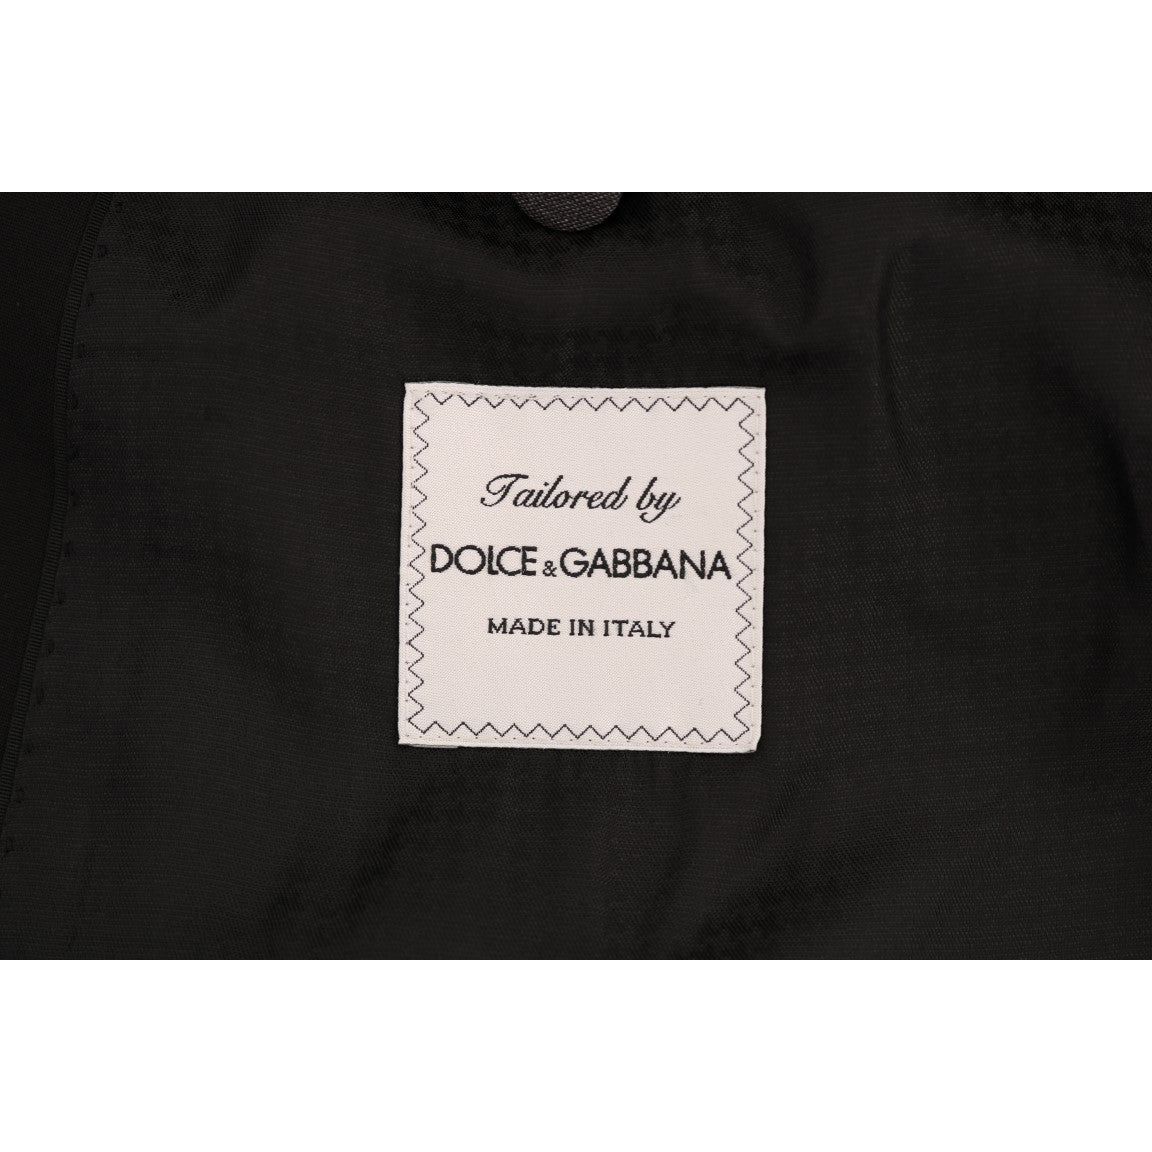 Dolce & Gabbana Elegant Black Double Breasted Wool Suit black-wool-stretch-3-piece-two-button-suit Suit 460902-black-wool-stretch-3-piece-two-button-suit-10.jpg